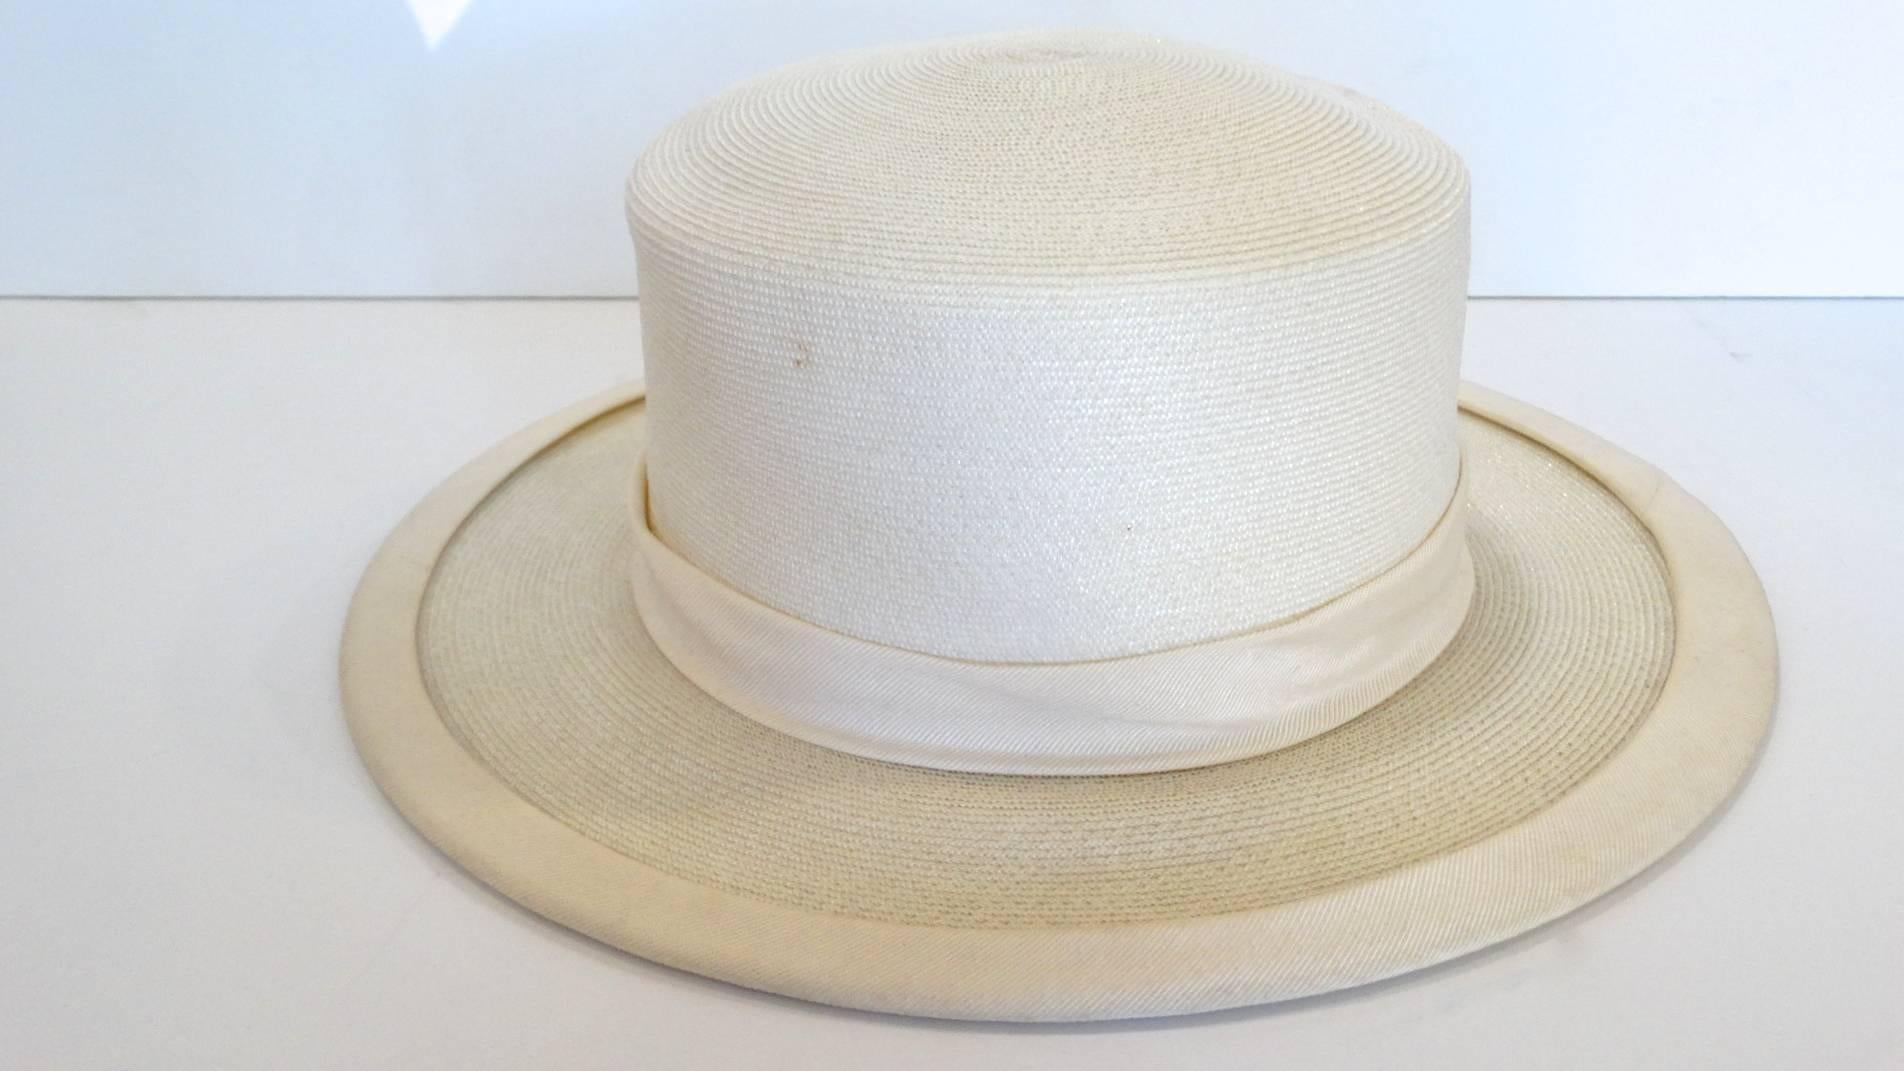 Panama meets the 70's! This exquisite panama style hat features a wide brim, with a gross grain sash, and adorned with two pom poms. The perfect summer hat!
This hat measures 3.5